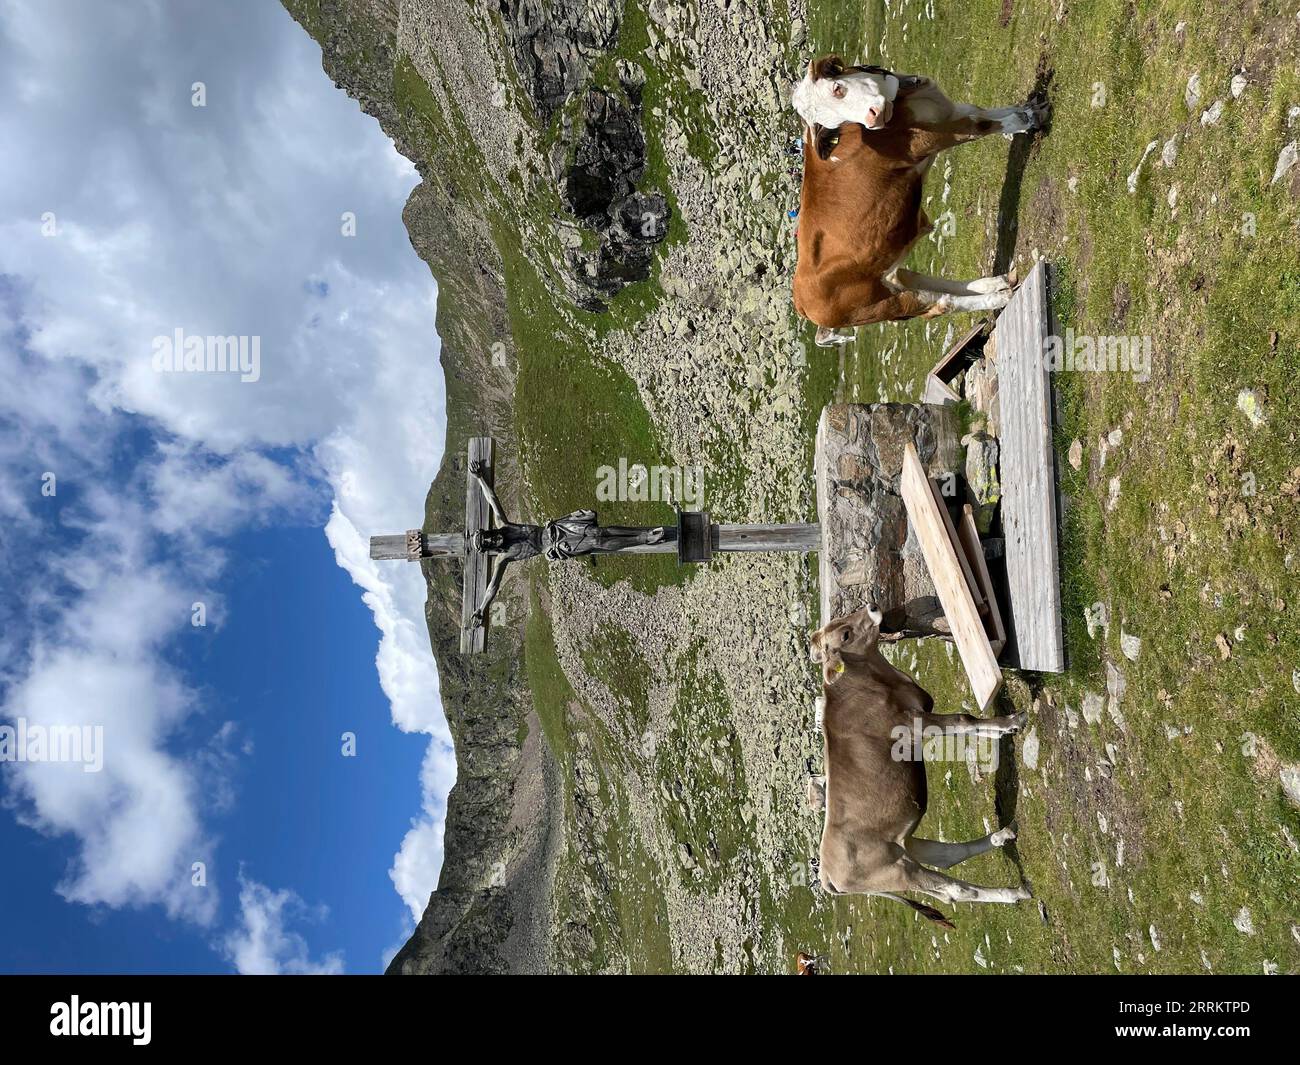 Hike to Latzfons Cross in South Tyrol, summit cross, cows, pilgrimage site, Sarntal Alps, 2300 m, viewpoint, Dolomites, Klausen, Latzfons, Wipptal, sun, mountains, clouds, nature, activity, Klausen, South Tyrol, Alto Adige, Italy Stock Photo